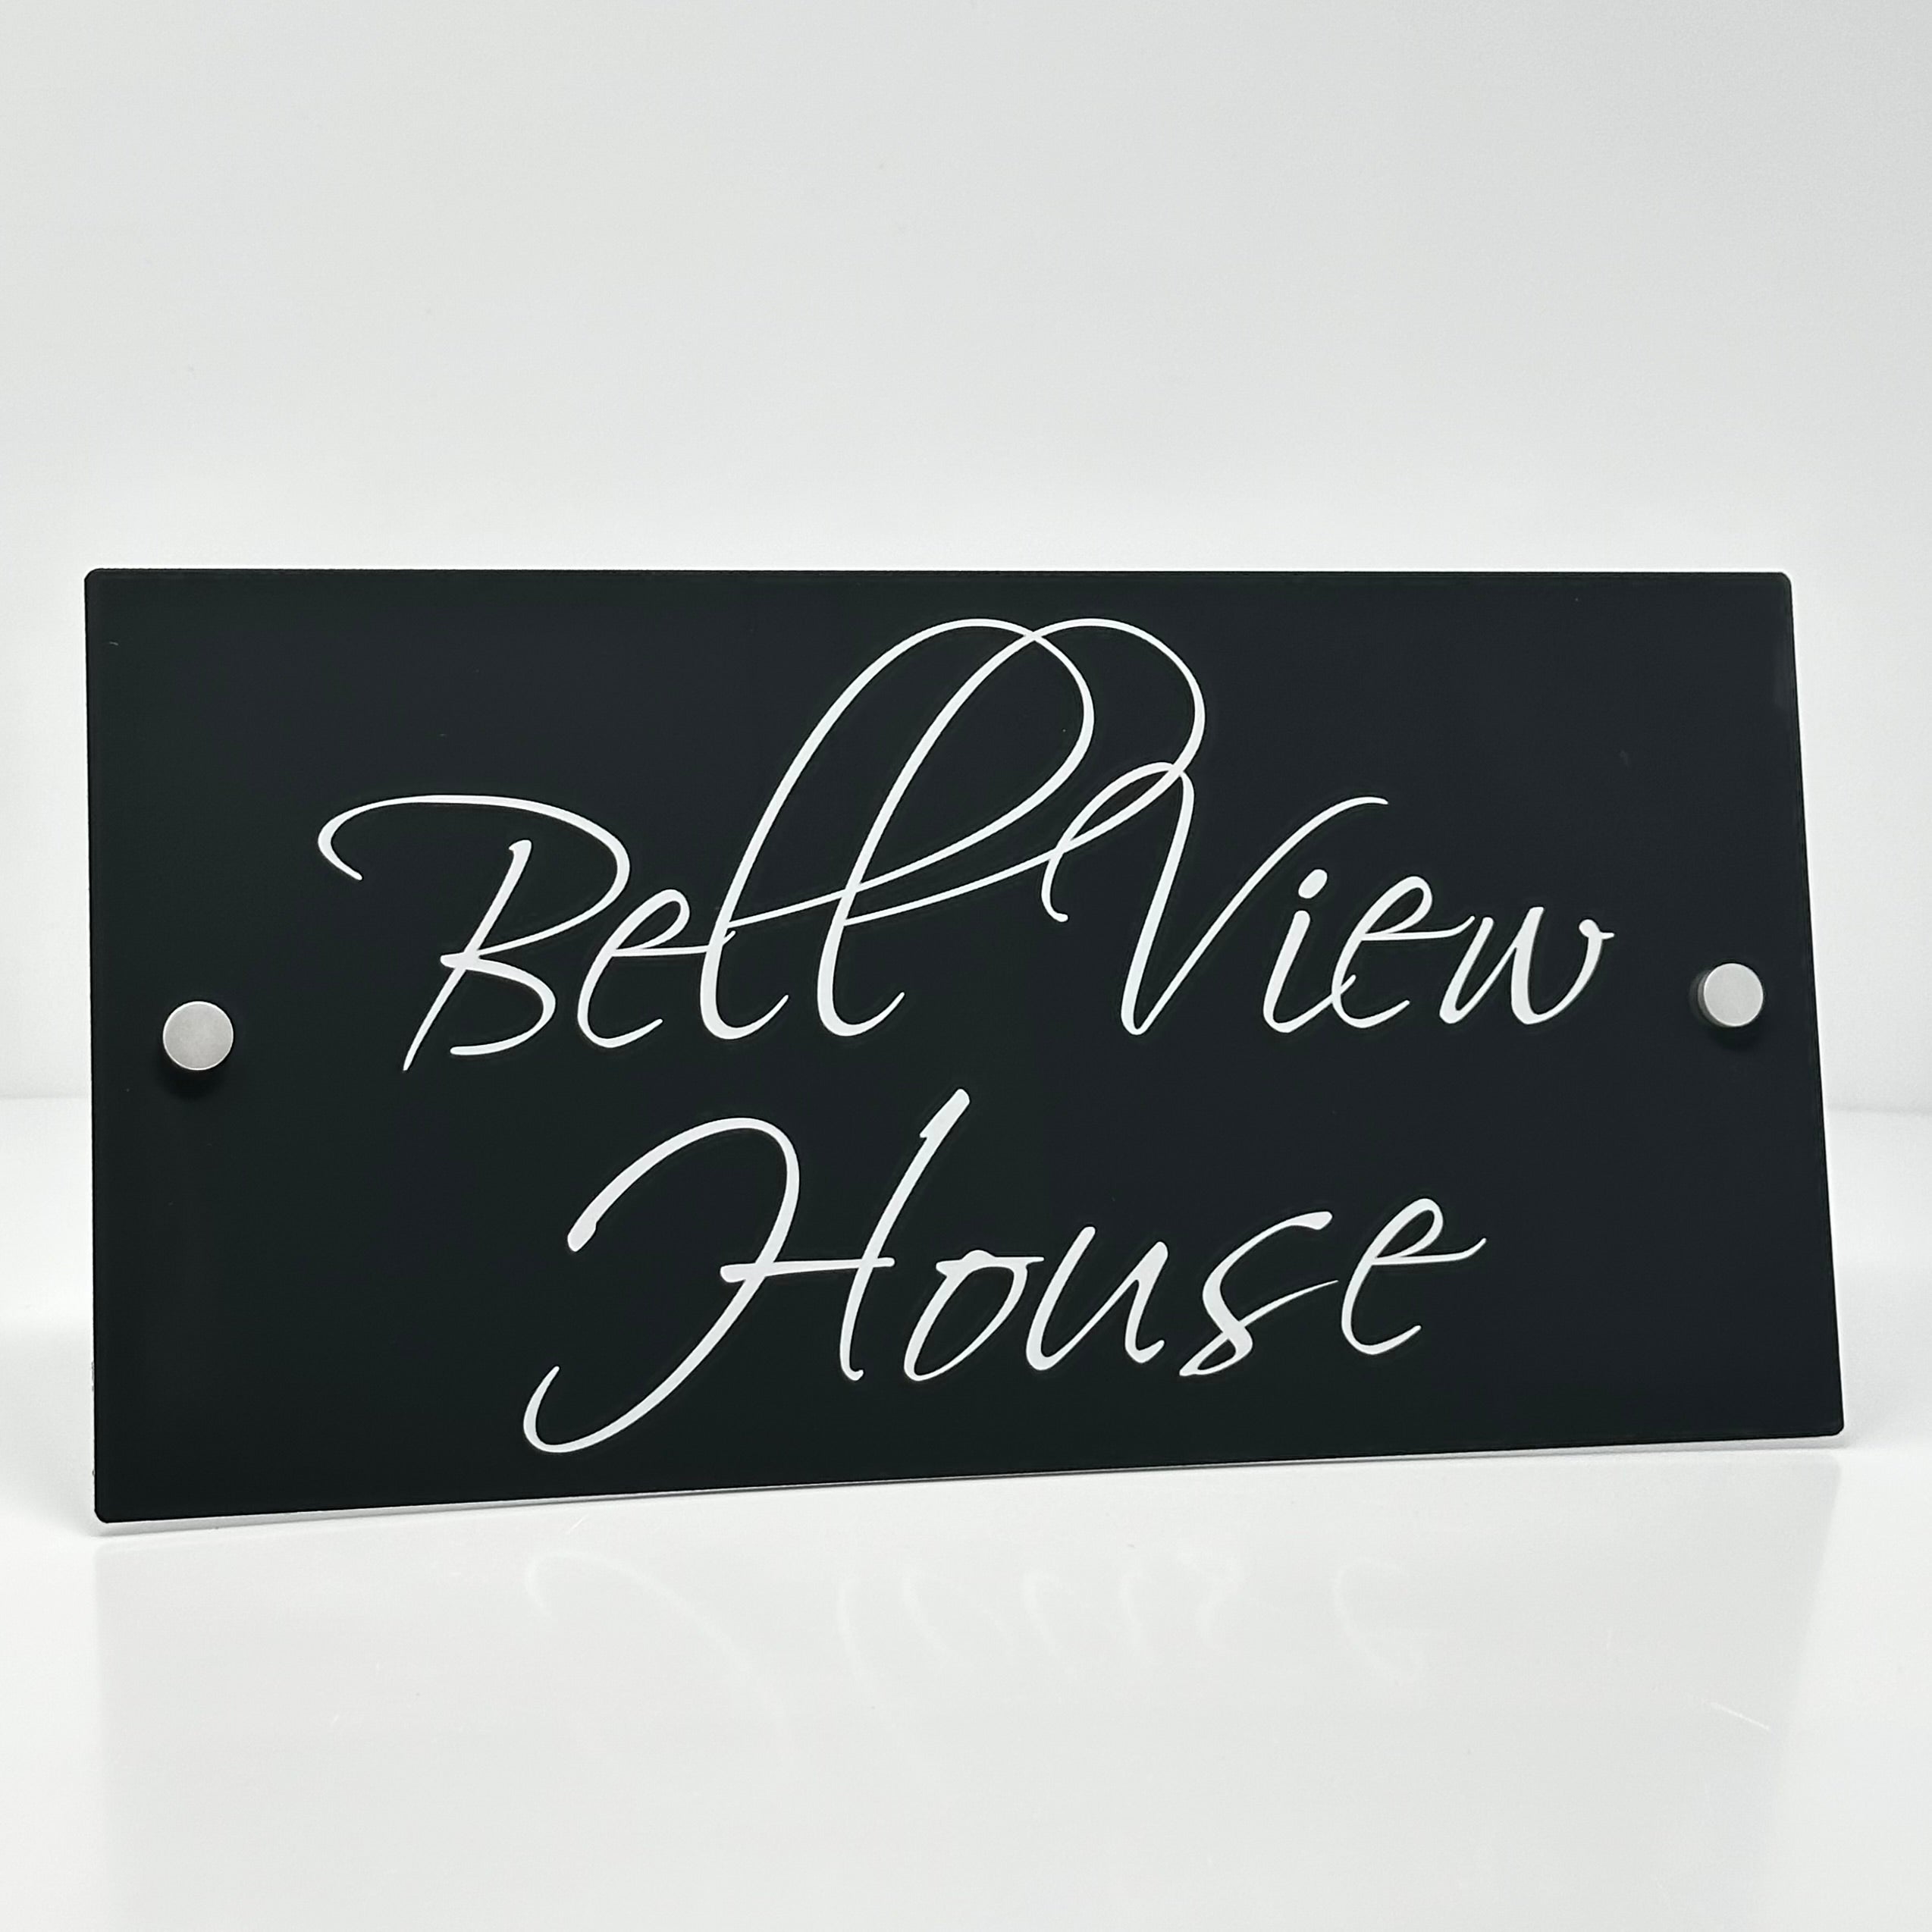 The Bell View Modern House Sign with a Anthracite Grey Panel and Satin Silver Stand Off Fixings ( Size - 35cm x 18cm )